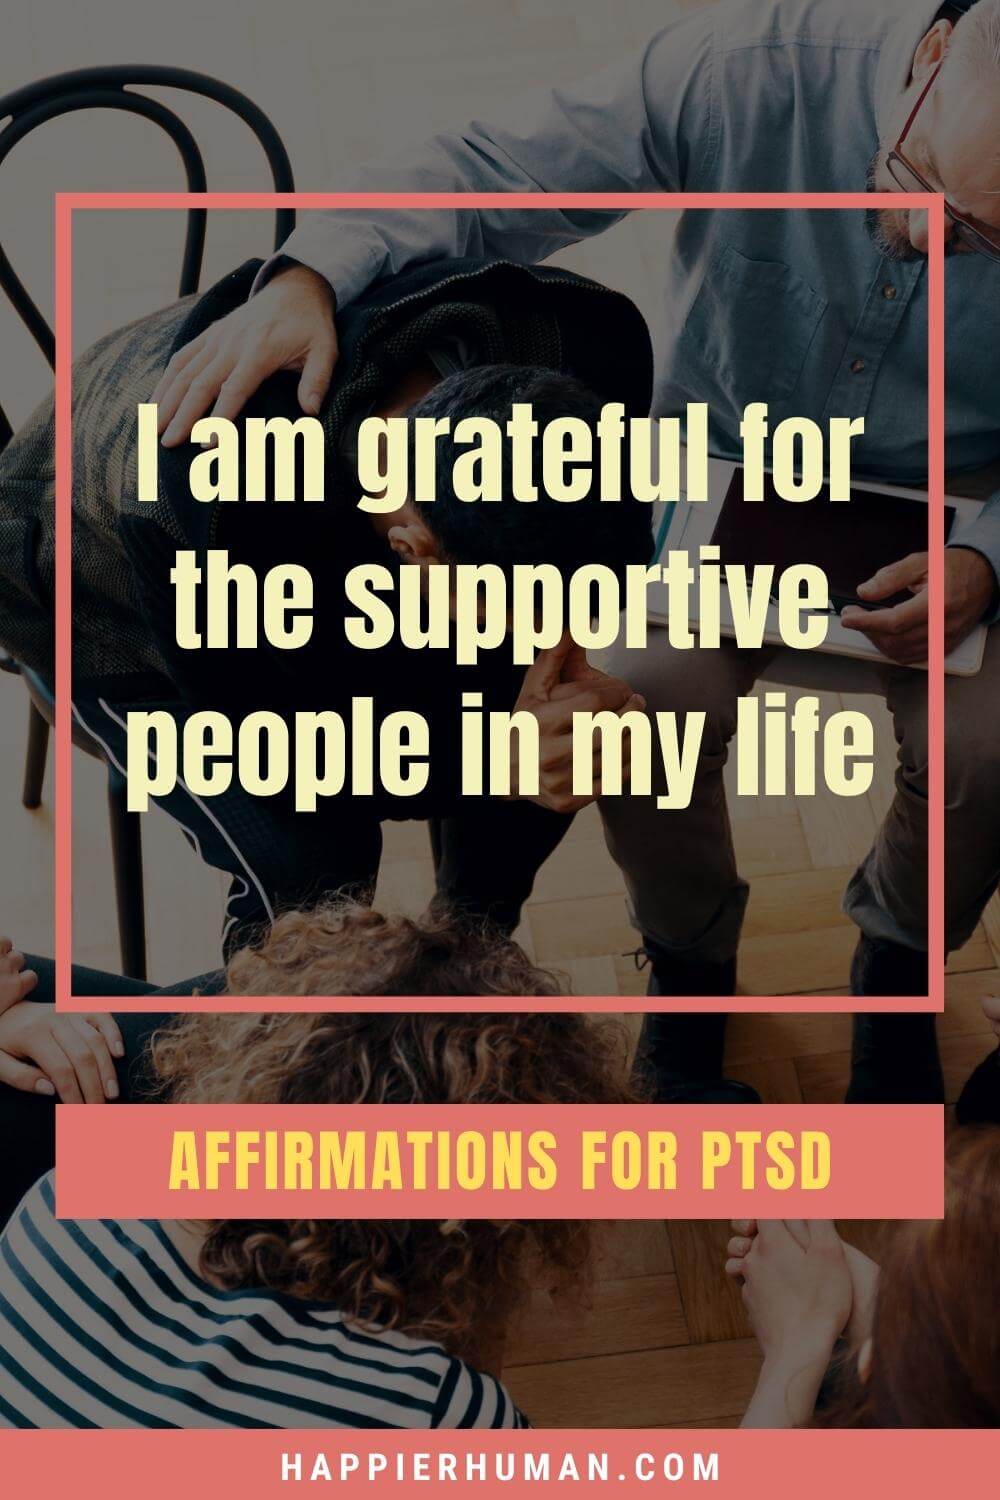 Affirmations For PTSD - I am grateful for the supportive people in my life | affirmations for betrayal trauma | affirmations for childhood trauma | inner child affirmations